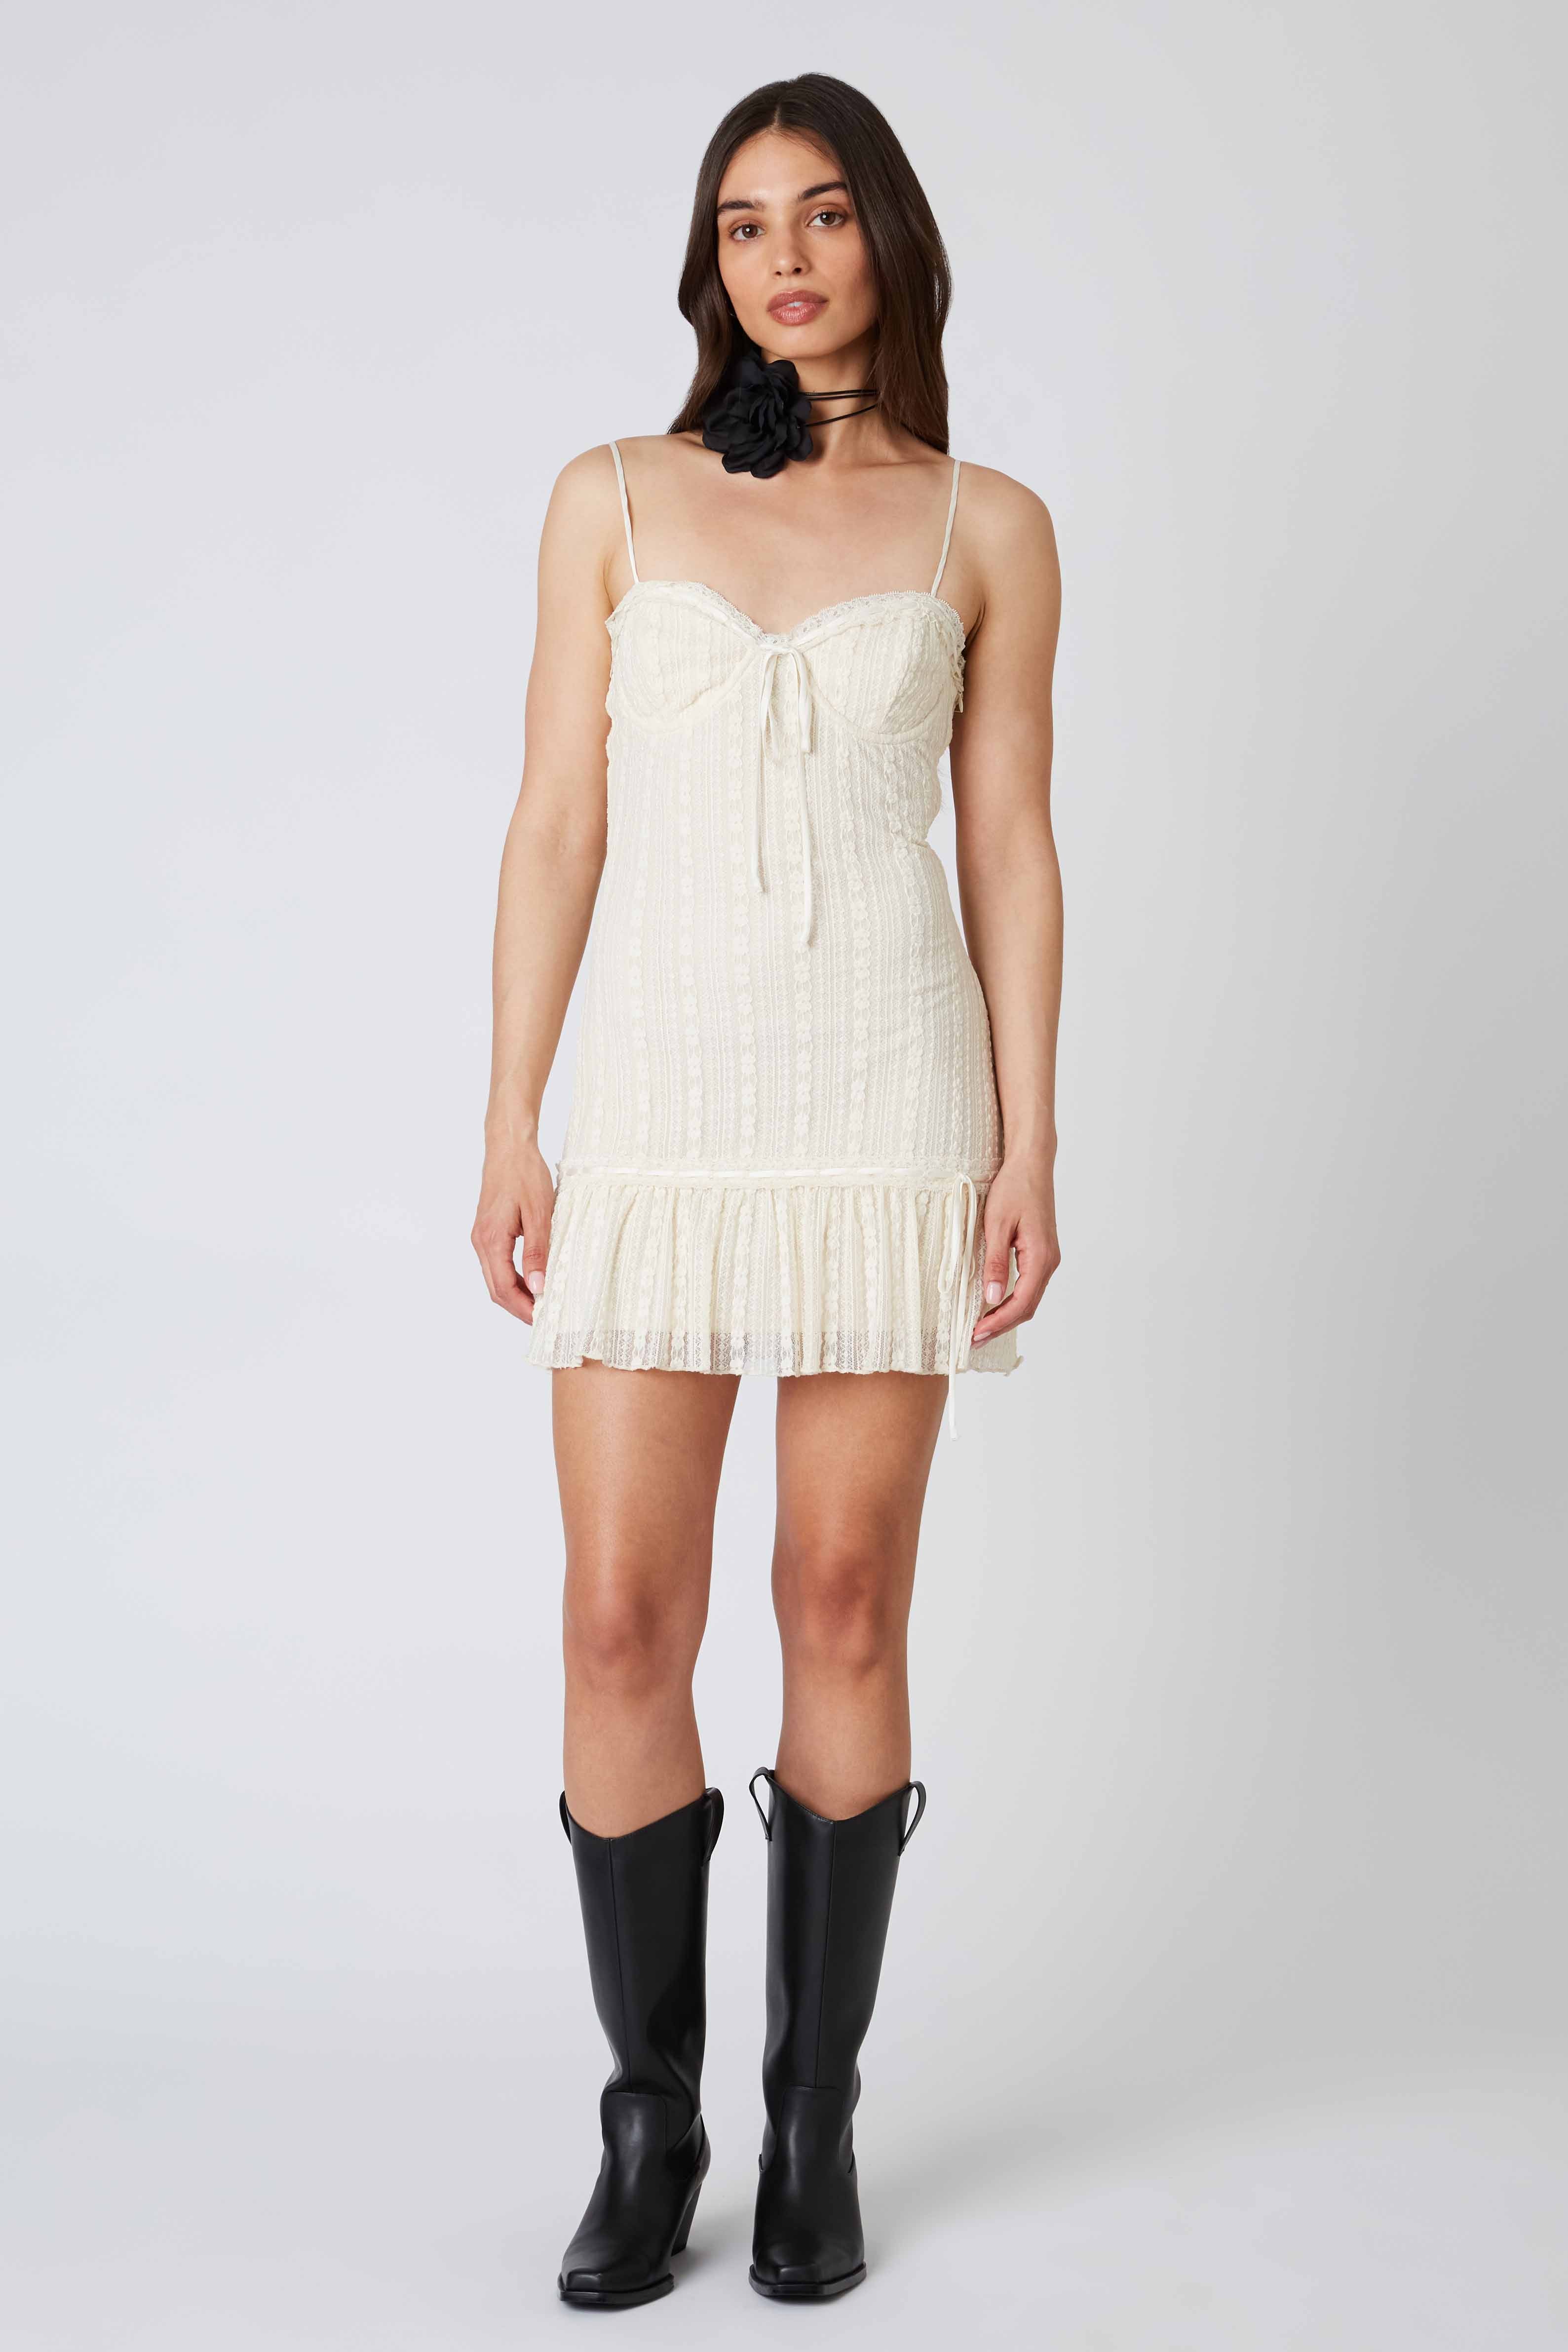 Lace Mini Dress in Ivory Front View